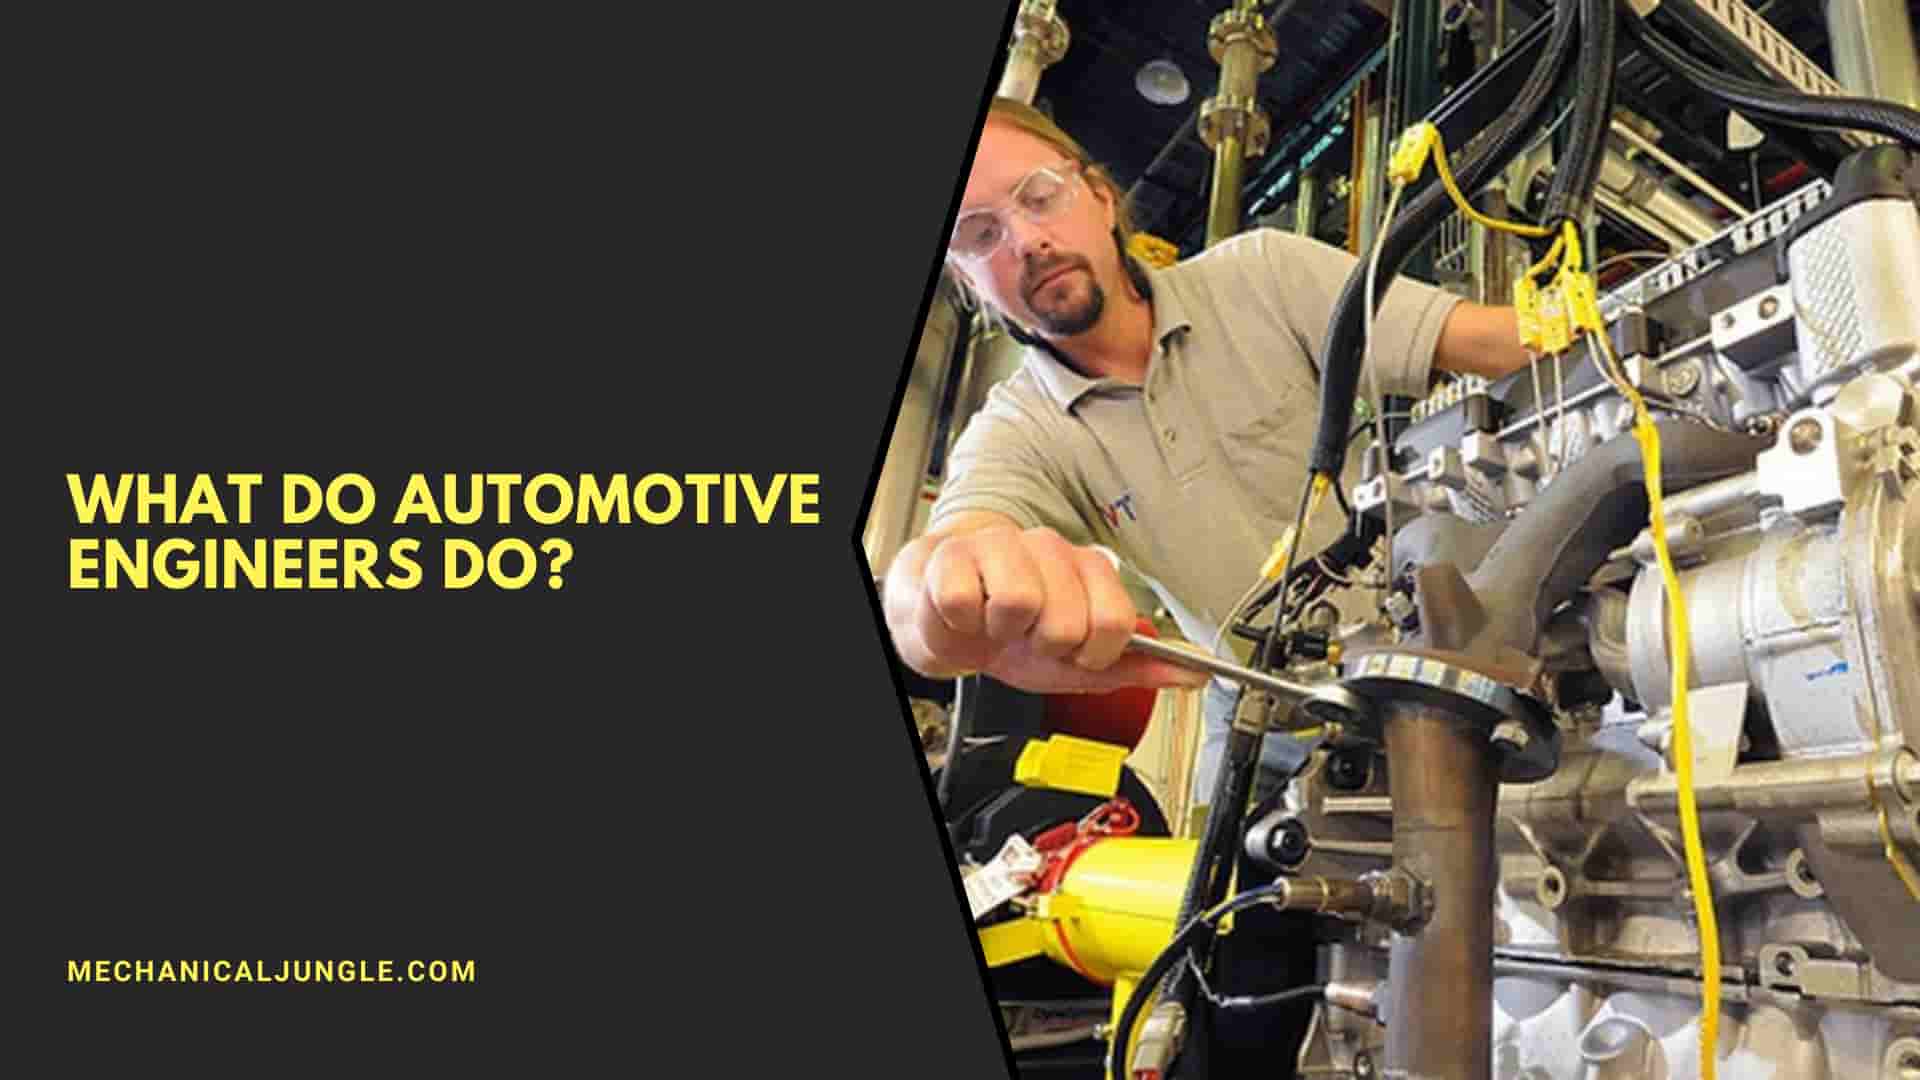 What Do Automotive Engineers Do?